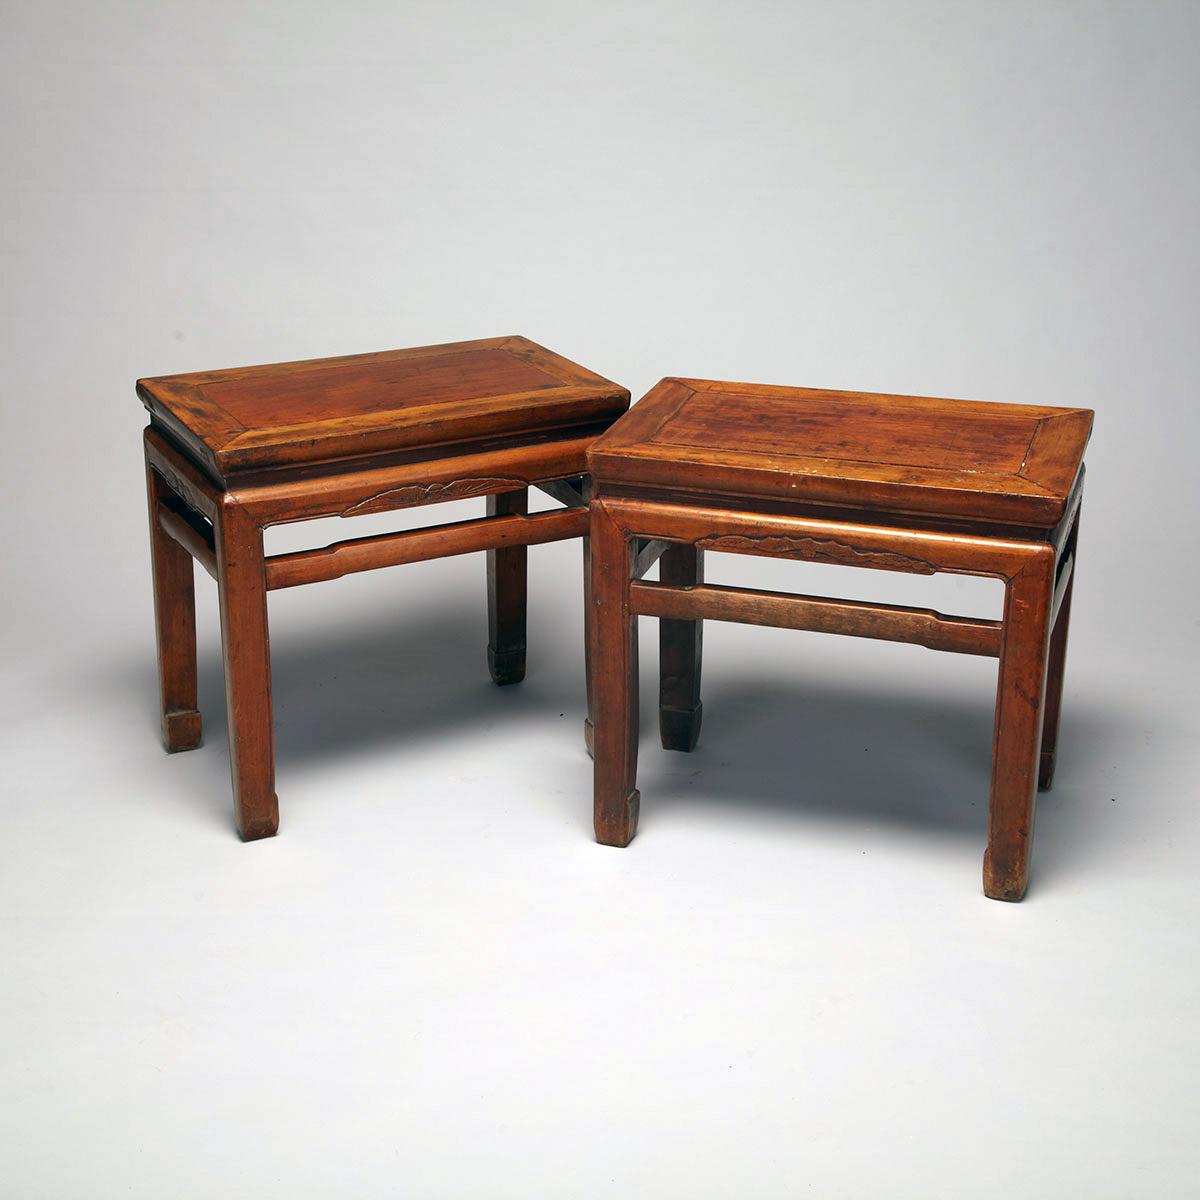 Pair of Mixed Wood Square Form Stools, Early 20th Century